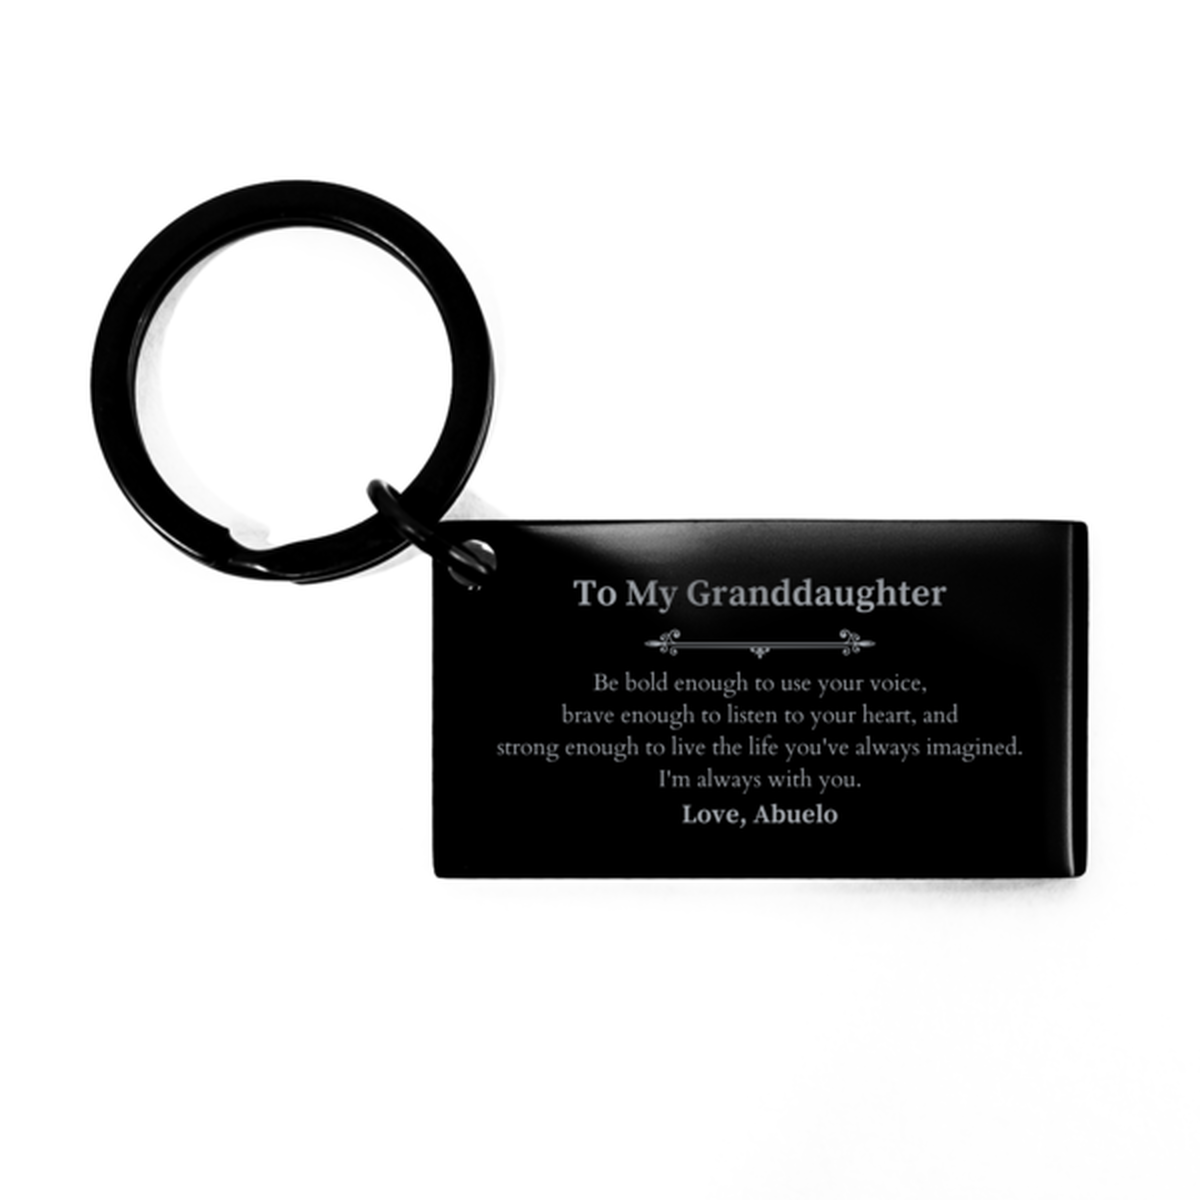 Keepsake Granddaughter Keychain Gift Idea Graduation Christmas Birthday Granddaughter from Abuelo, Granddaughter Be bold enough to use your voice, brave enough to listen to your heart. Love, Abuelo